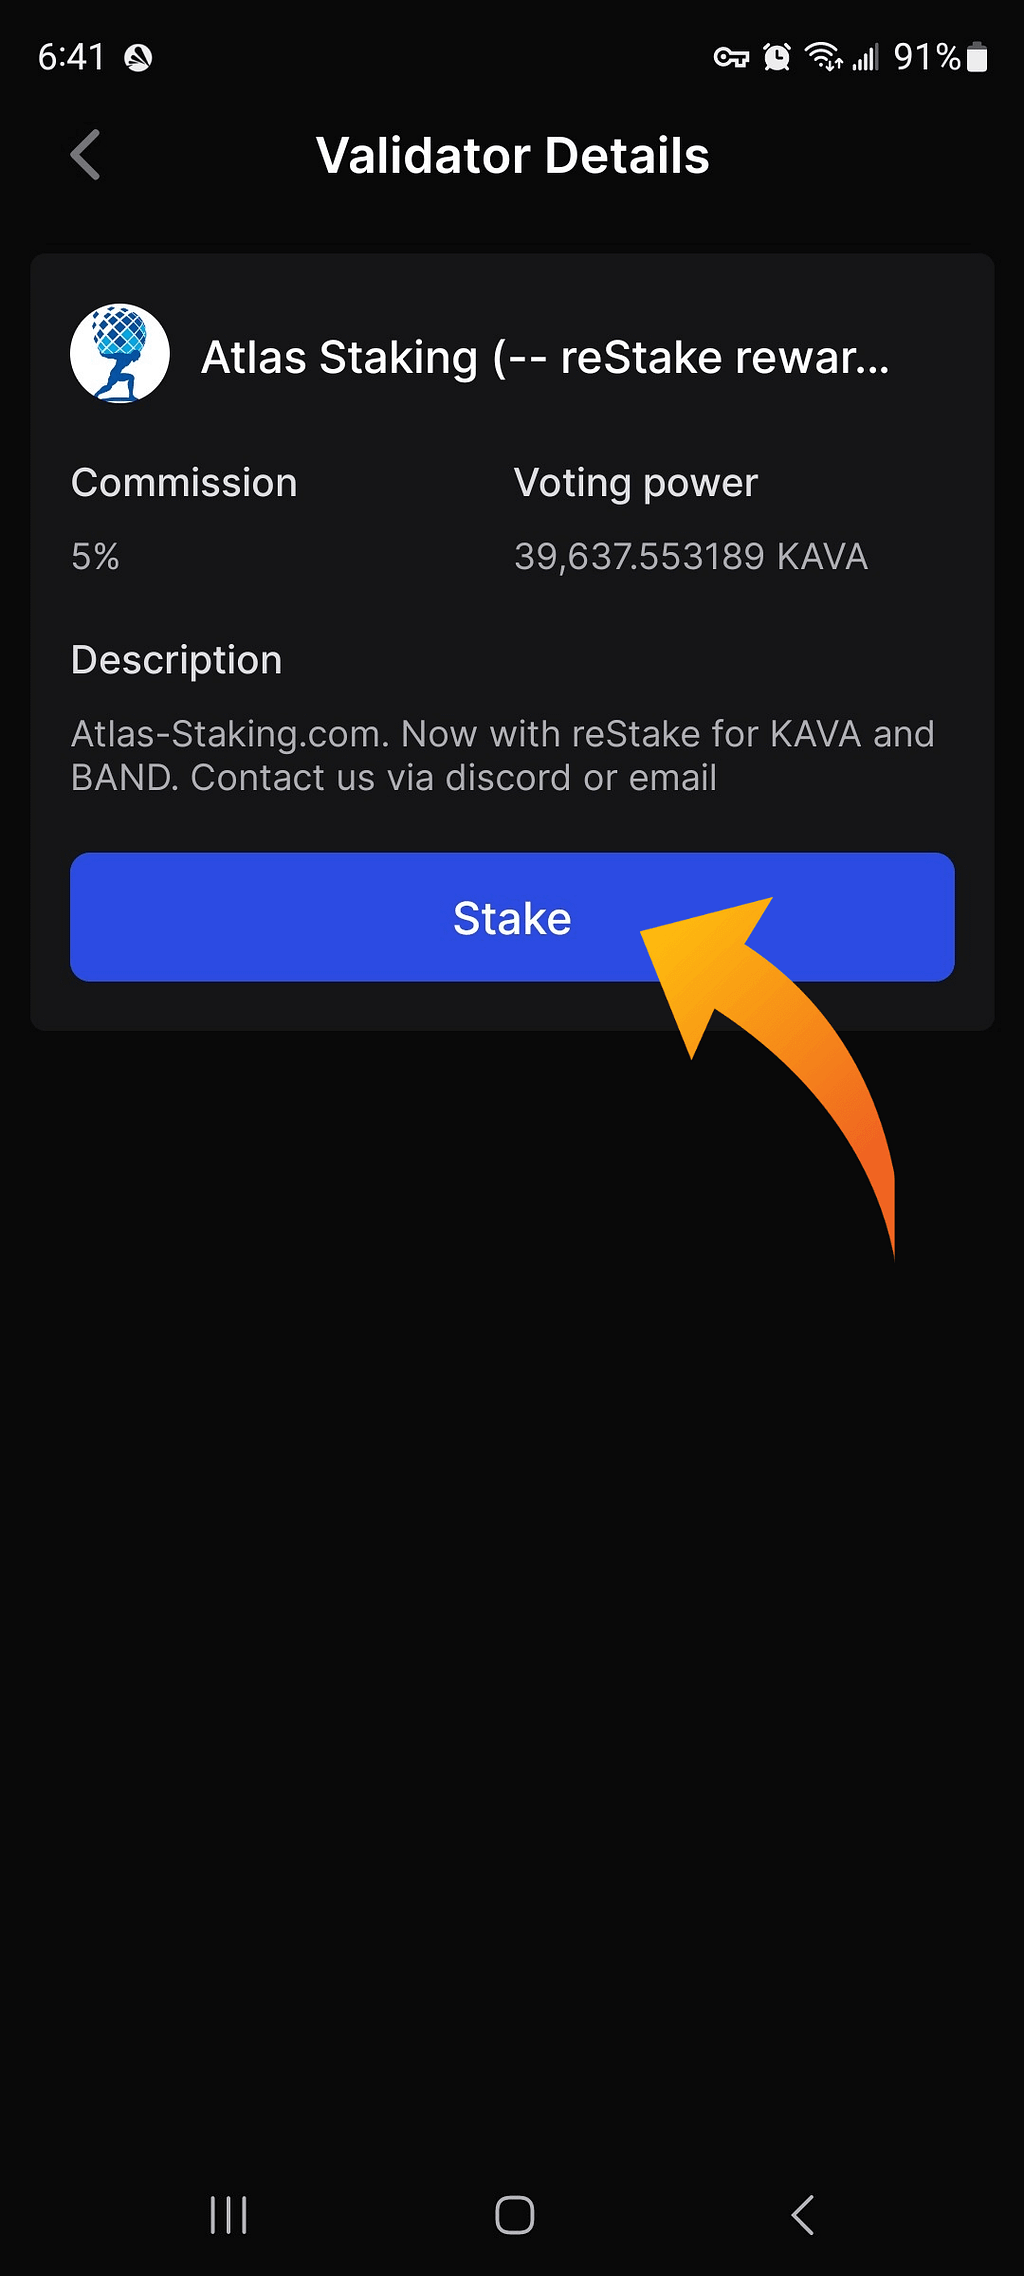 how do you stake KAVA on Keplr, how do you stake on Keplr, is Kava staking worth it, Is KAVA good for staking, KAVA staking APY, What is the reward for KAVA staking, Is KAVA staking on the Kava blockchain or Ethereum, How do I get KAVA on my Keplr wallet, Keplr wallet staking guide, KAVA EVM staking with Keplr Wallet, KAVA staking rewards calculator, How to delegate KAVA tokens, Is KAVA Proof of Stake, Does Keplr wallet support KAVA, Trading KAVA on Keplr wallet, How to add KAVA to Keplr wallet,